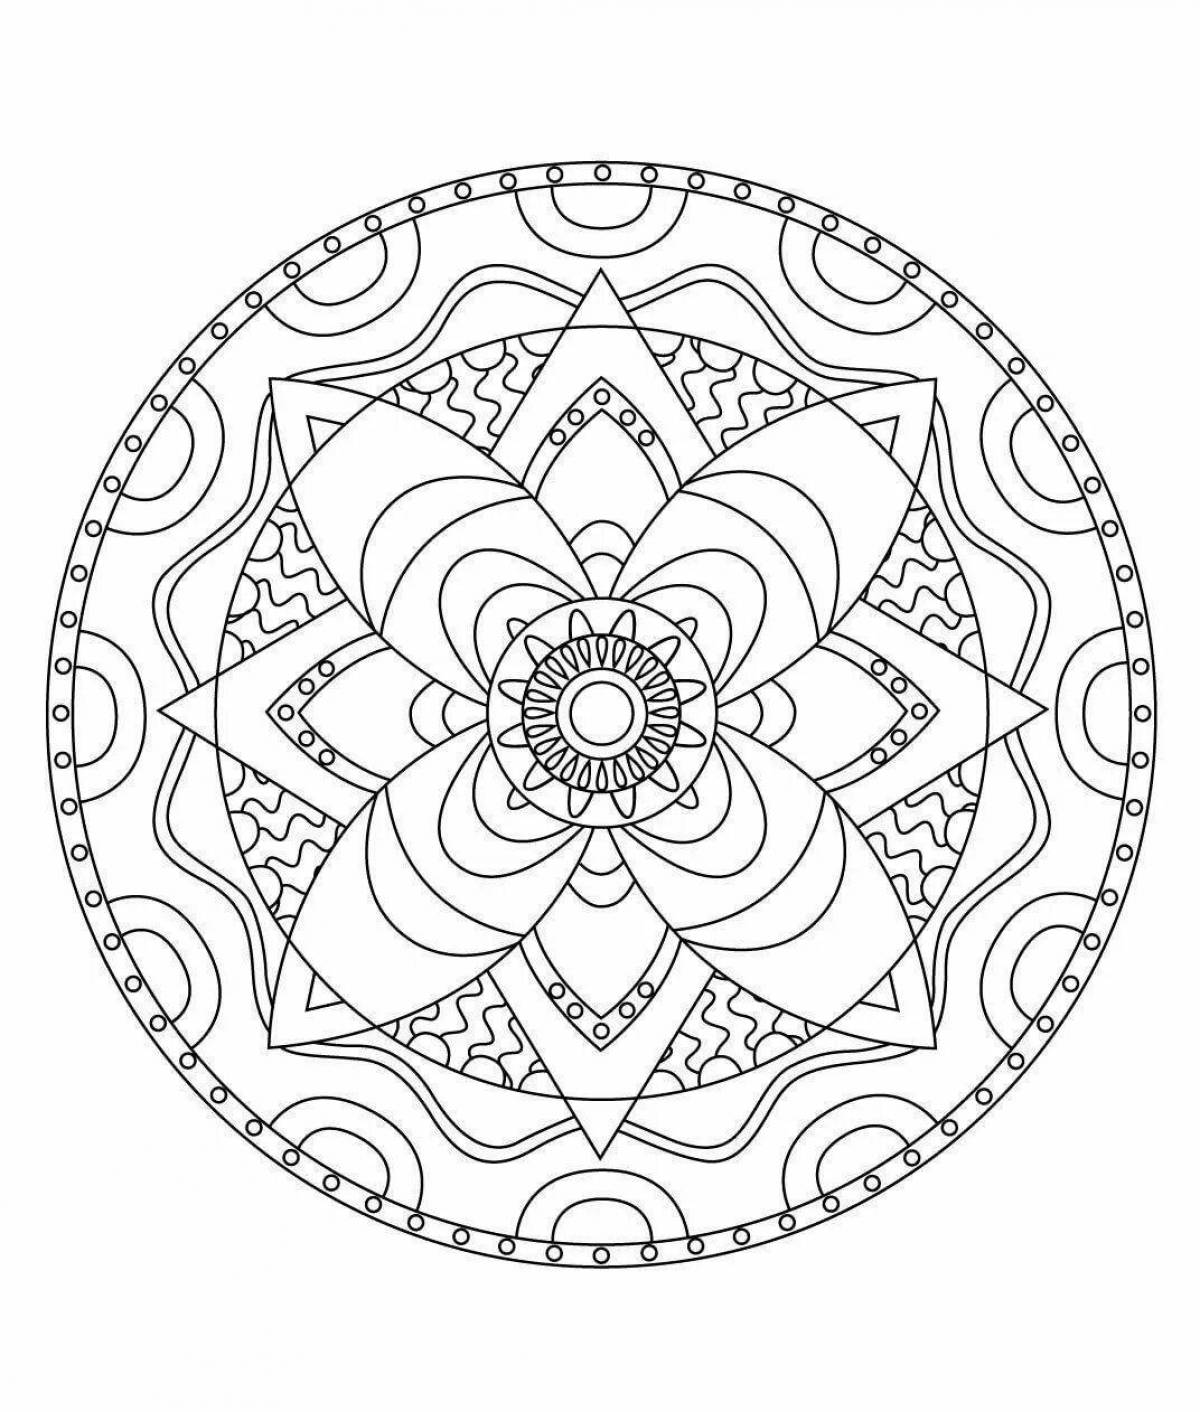 Exquisite coloring mandala of peace and tranquility